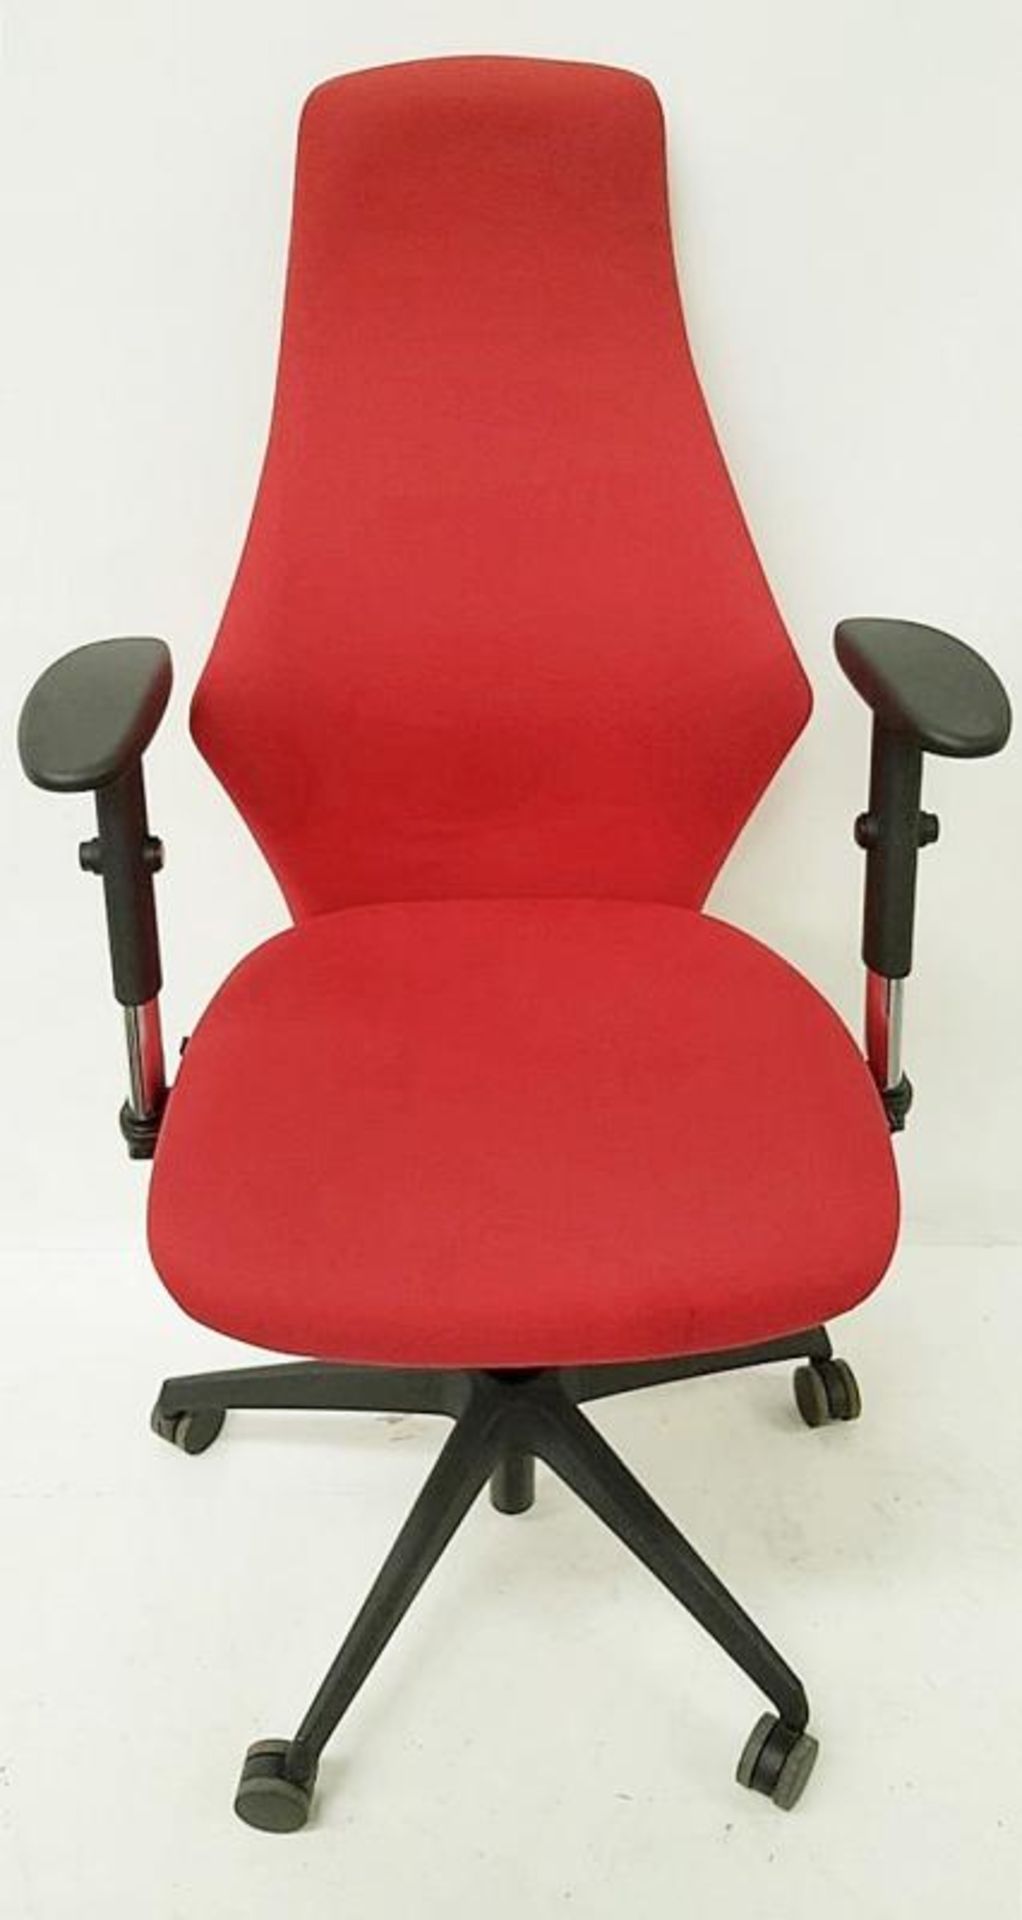 A Pair Of LIMA Branded Premium Adjustable Office Chairs Featuring Fixed Lumbar Support And Arm Rests